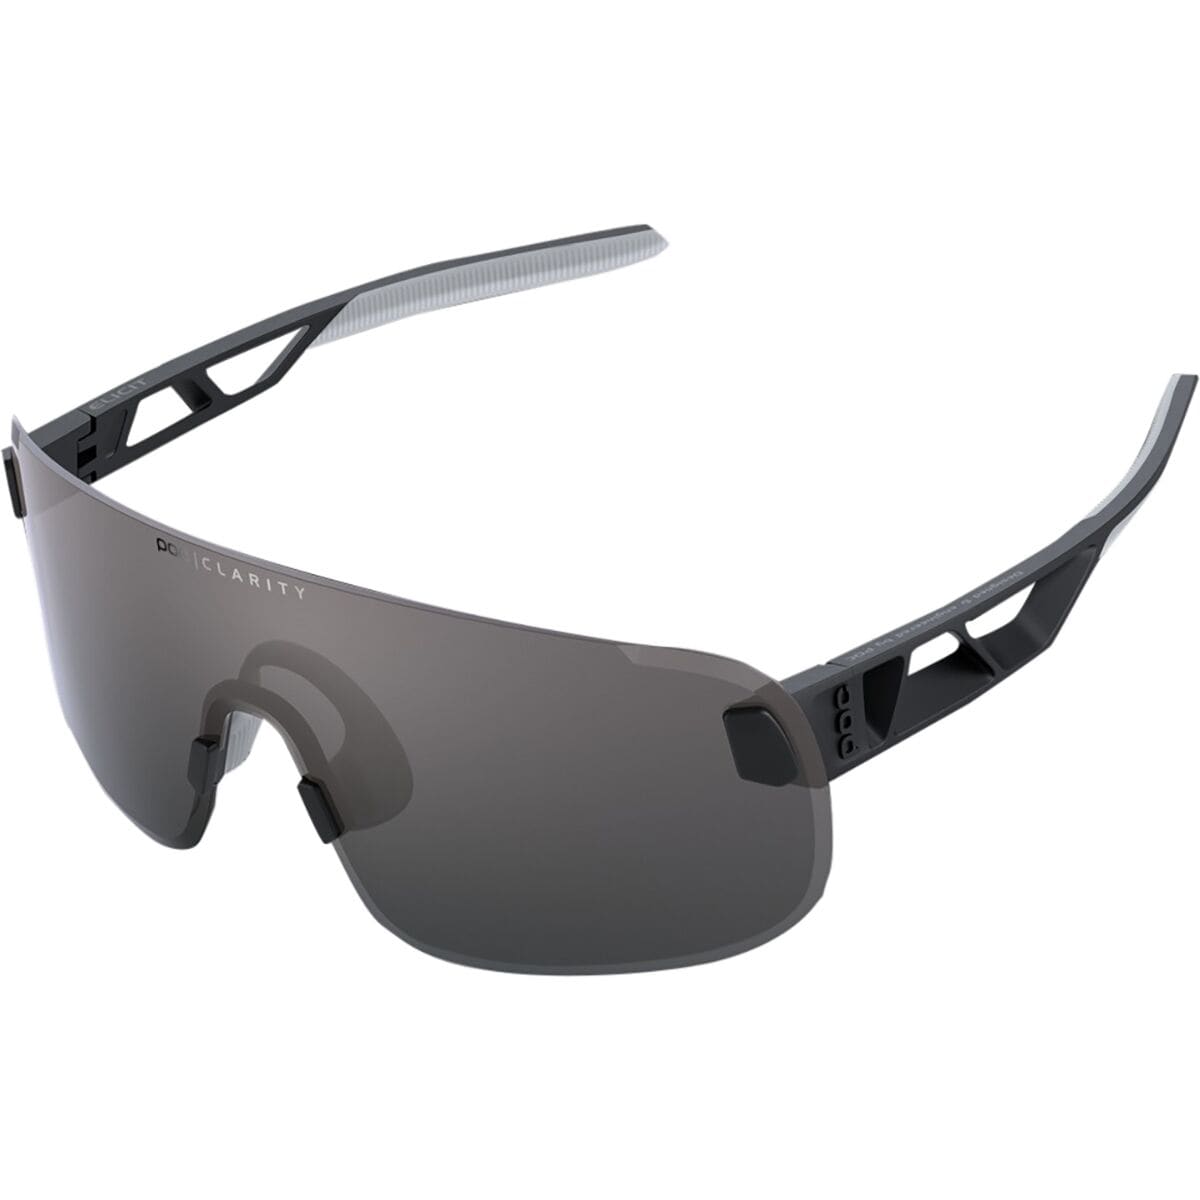 Best cycling glasses: Protection from the sun plus heaps of style